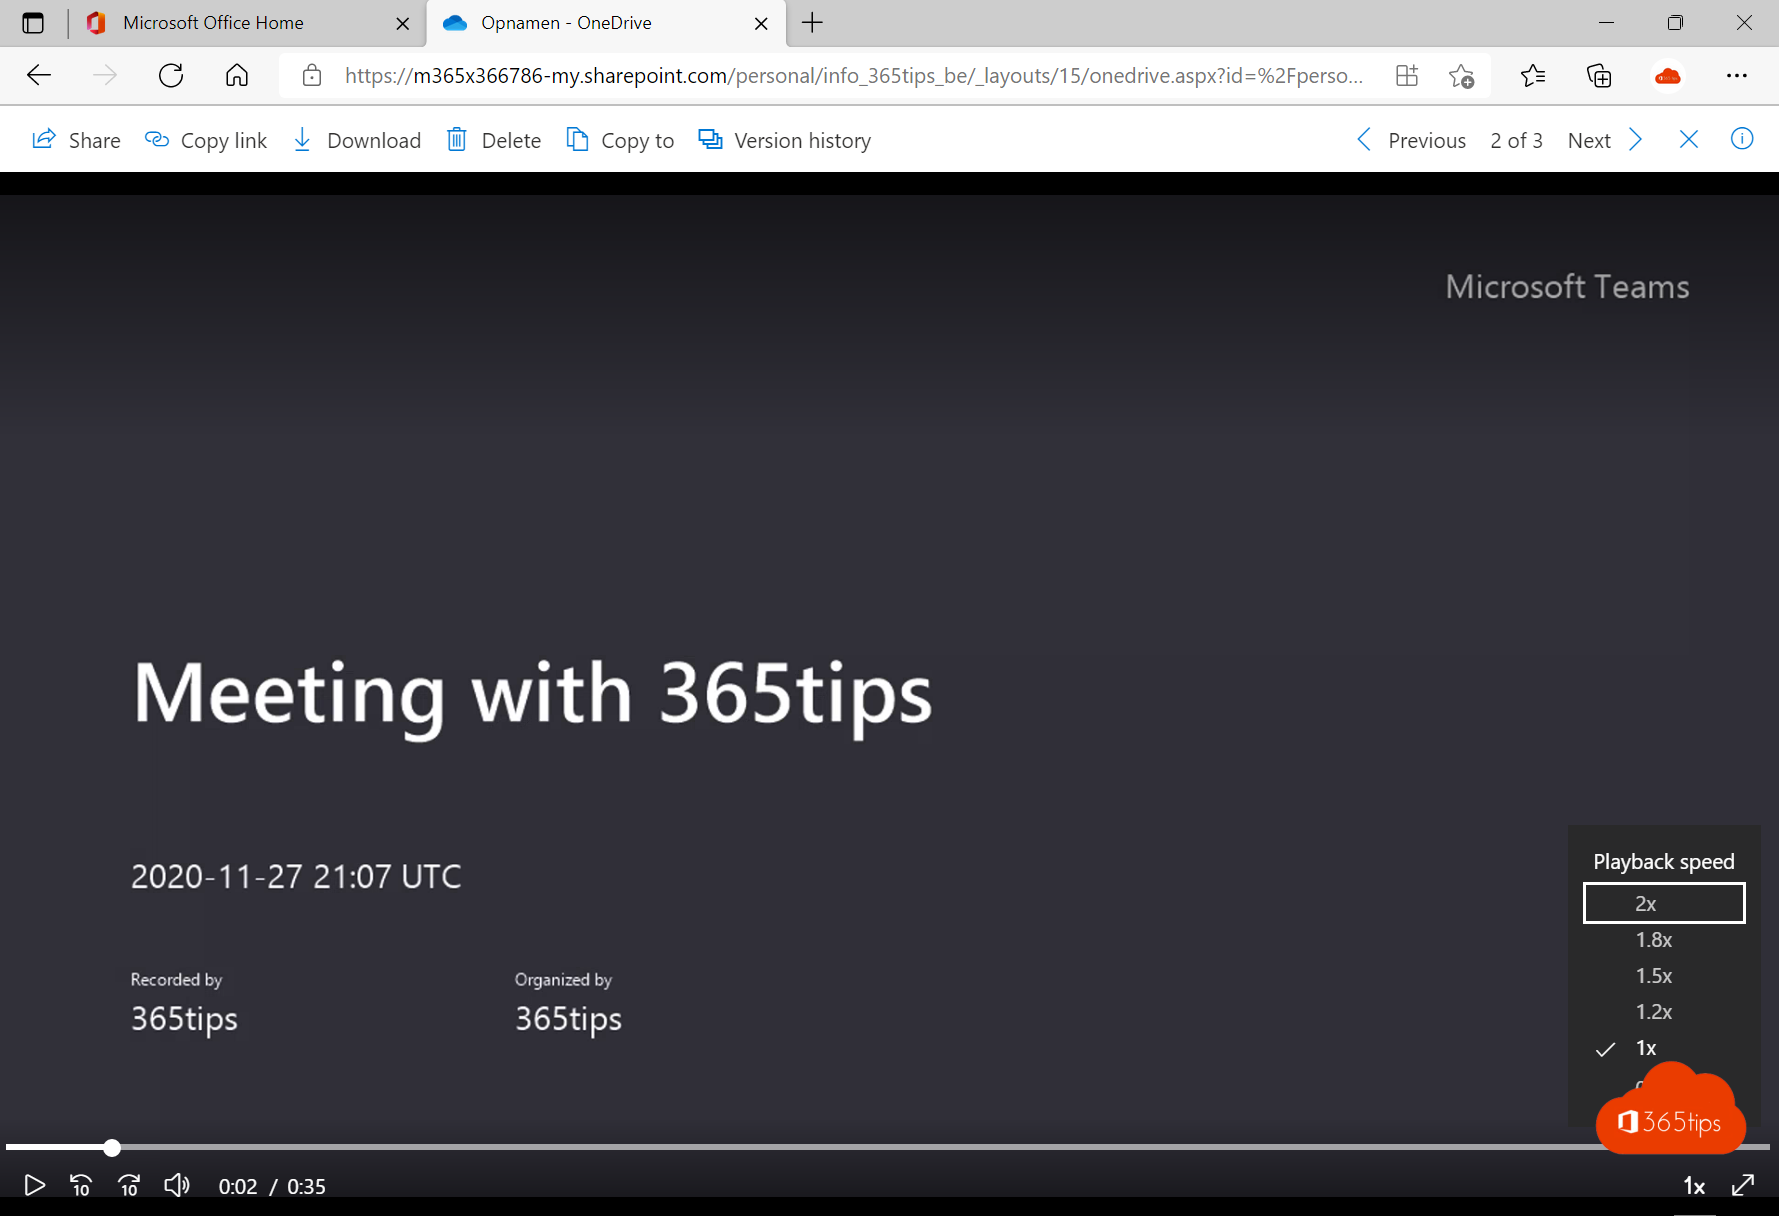 How do I play back a recording of a MicrosoftTeams meeting in fast motion? 🚀🕒